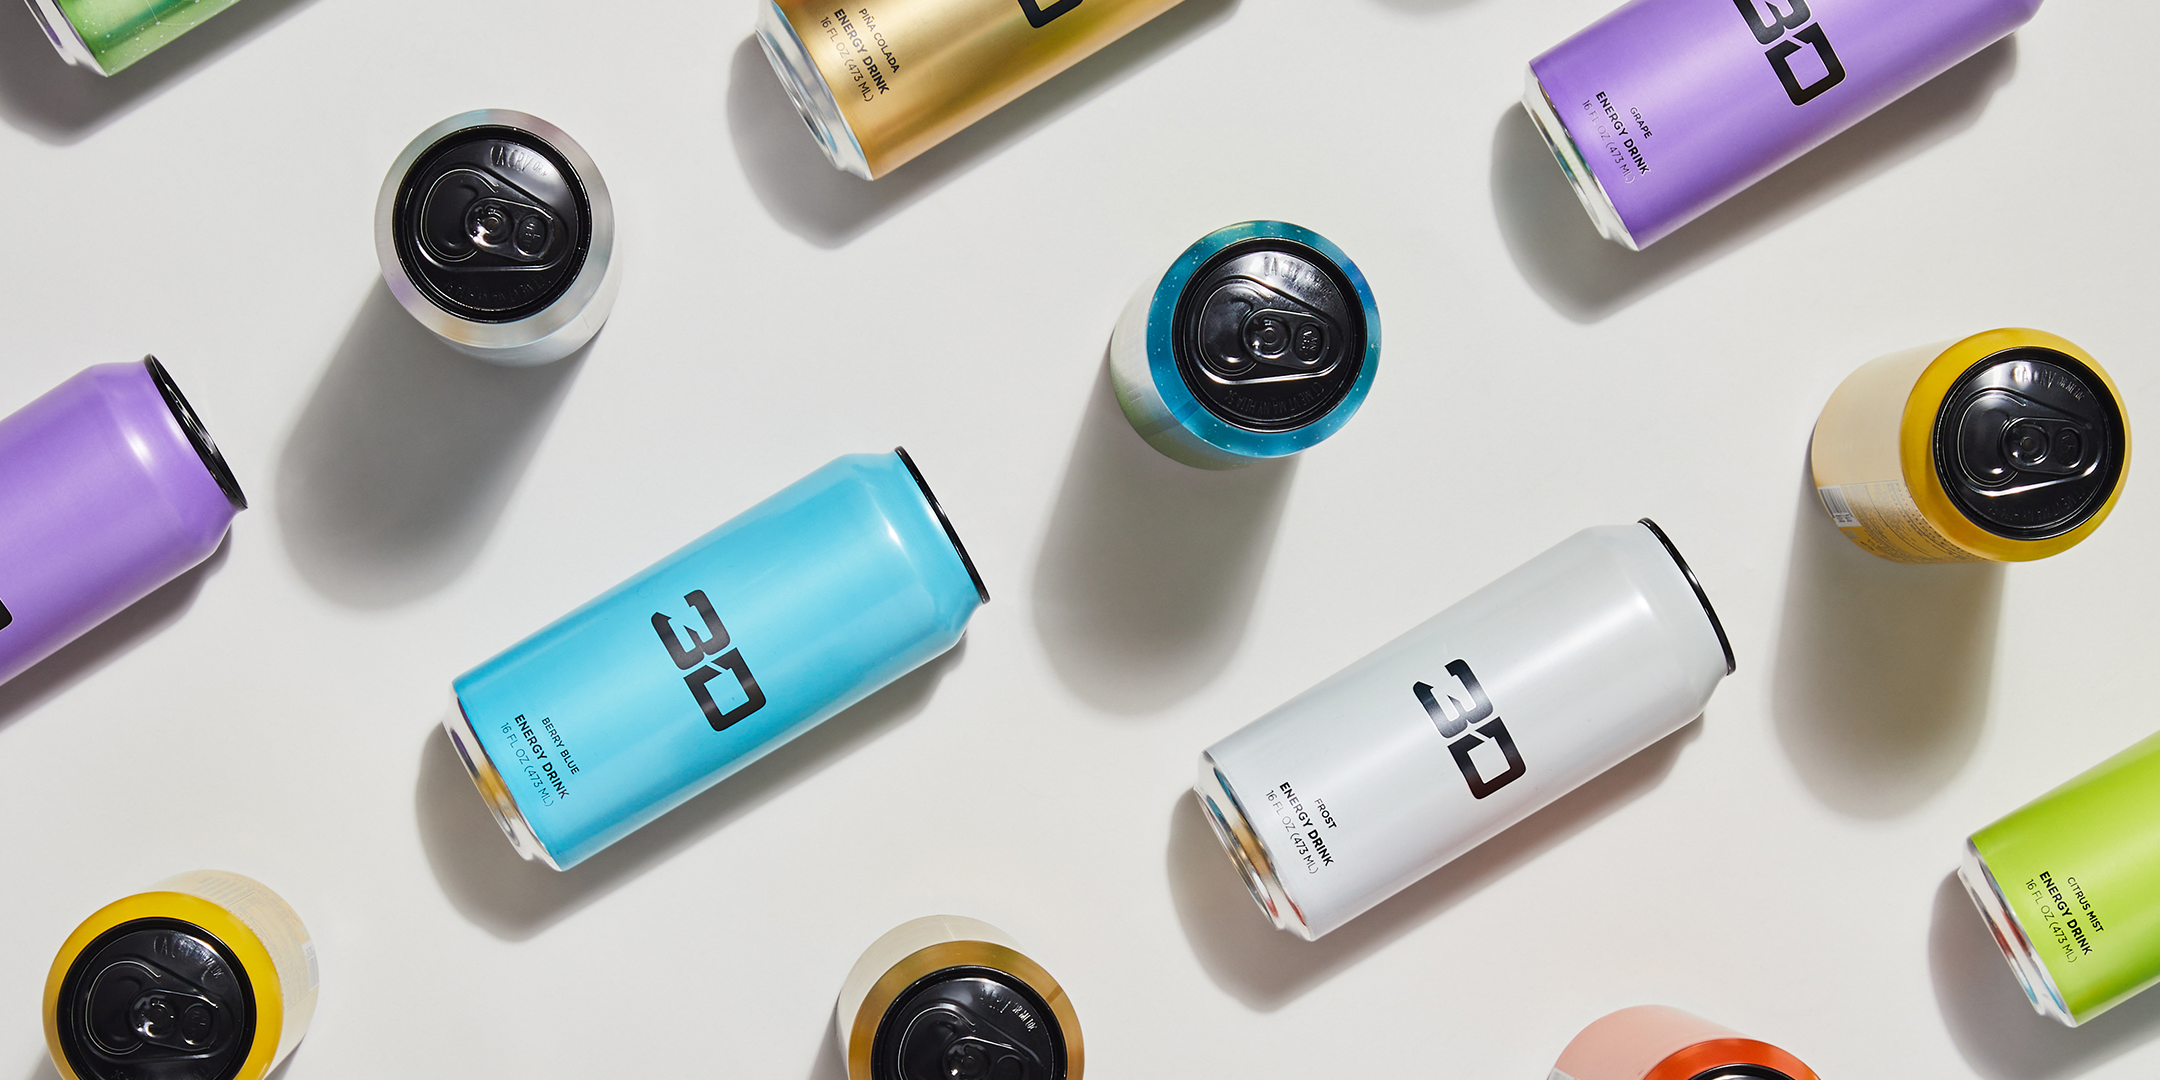 Artistically placed energy drink cans with "3D" branding in a range of flavors are displayed in an overhead arrangement.